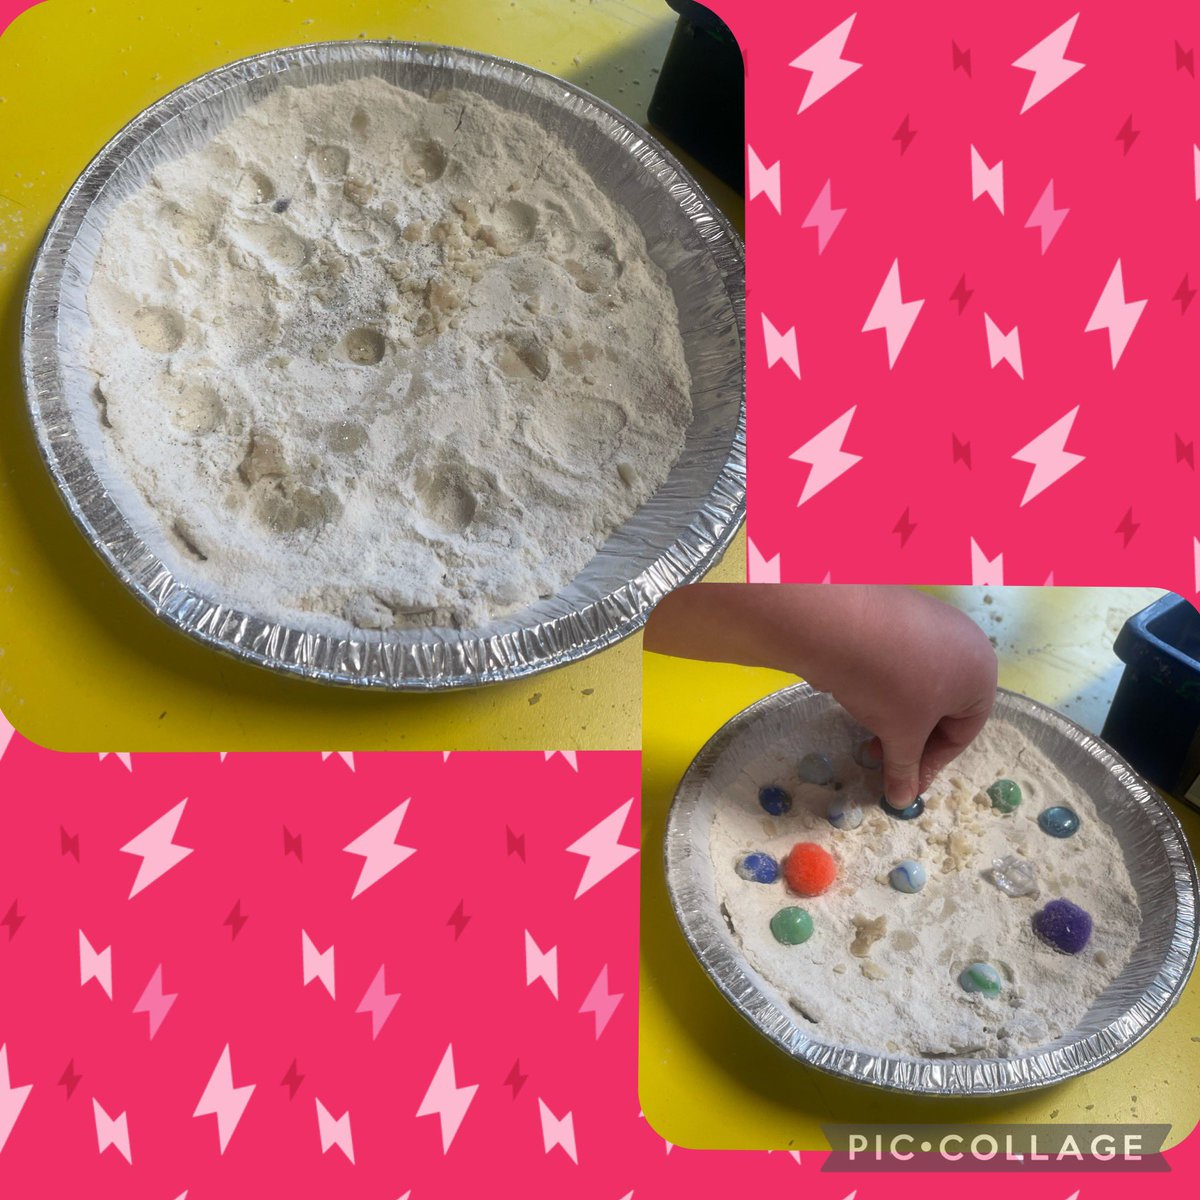 Room 7 explored the moon’s surface by conducting an experiment. We made moon sand and dropped different objects inside to create craters #internationalspaceweek